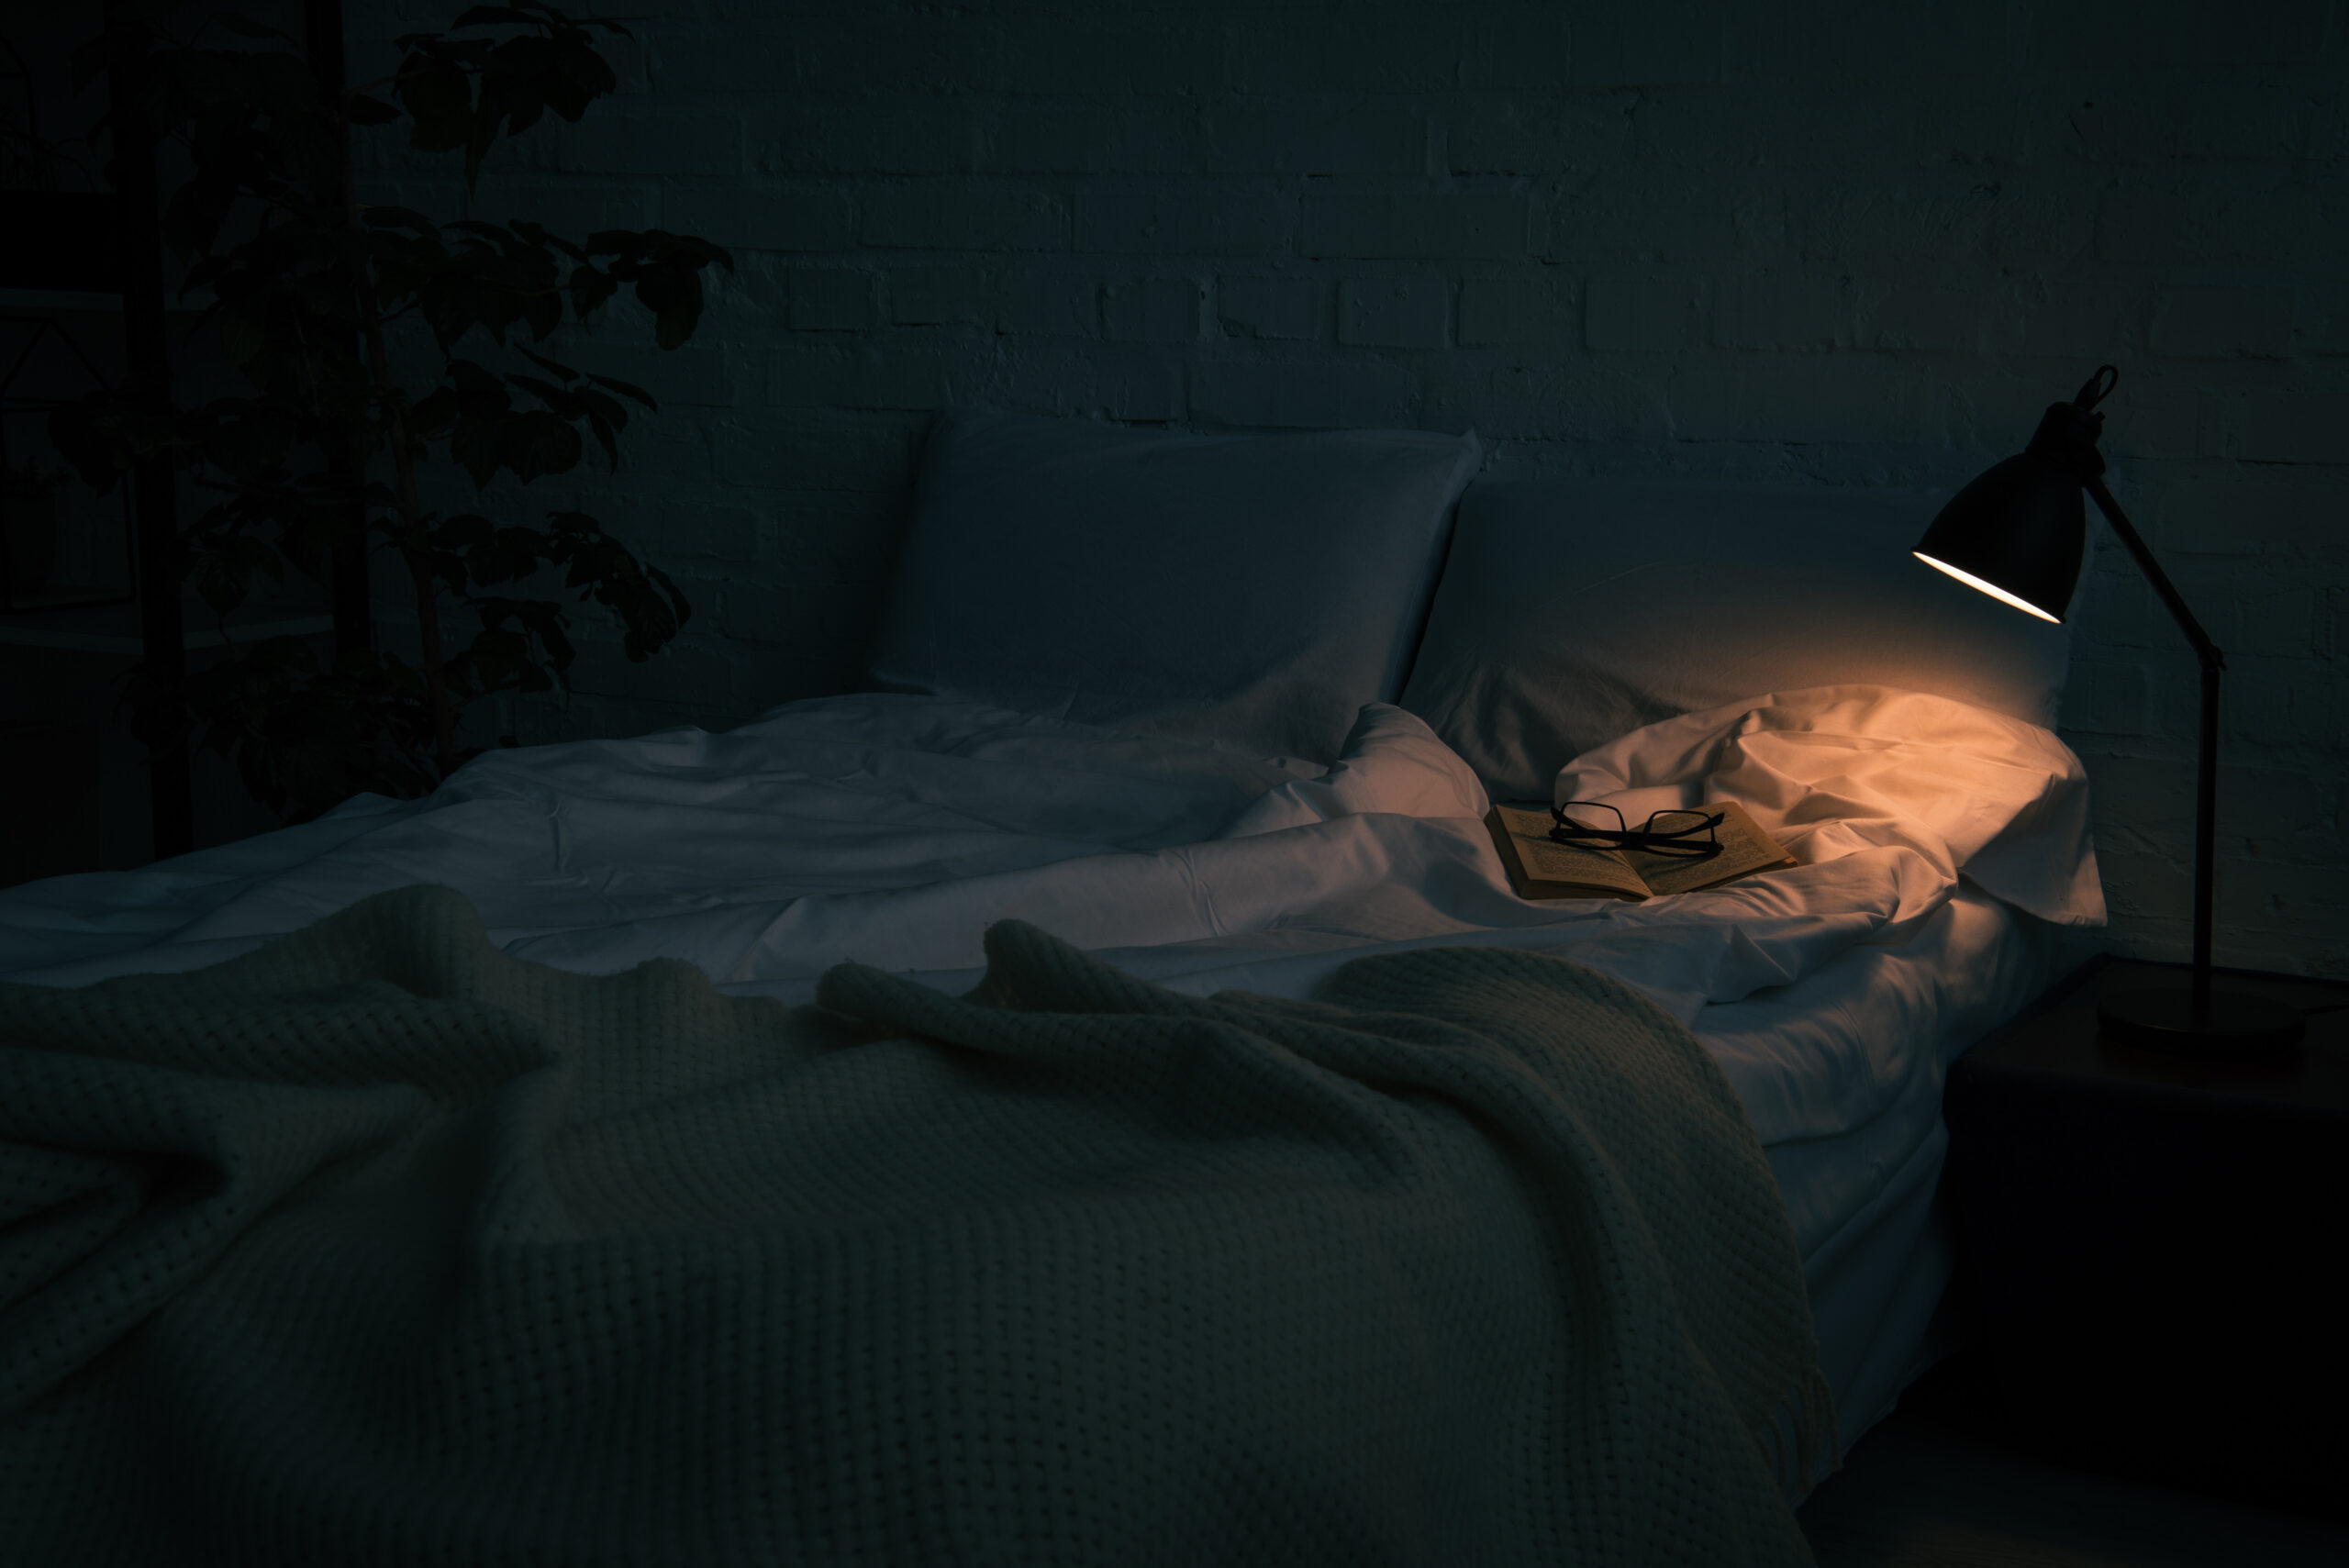 A dimly lit room with a bed and a book open on top of the bed. The only source of light is coming from a small lamp on a bedside table.